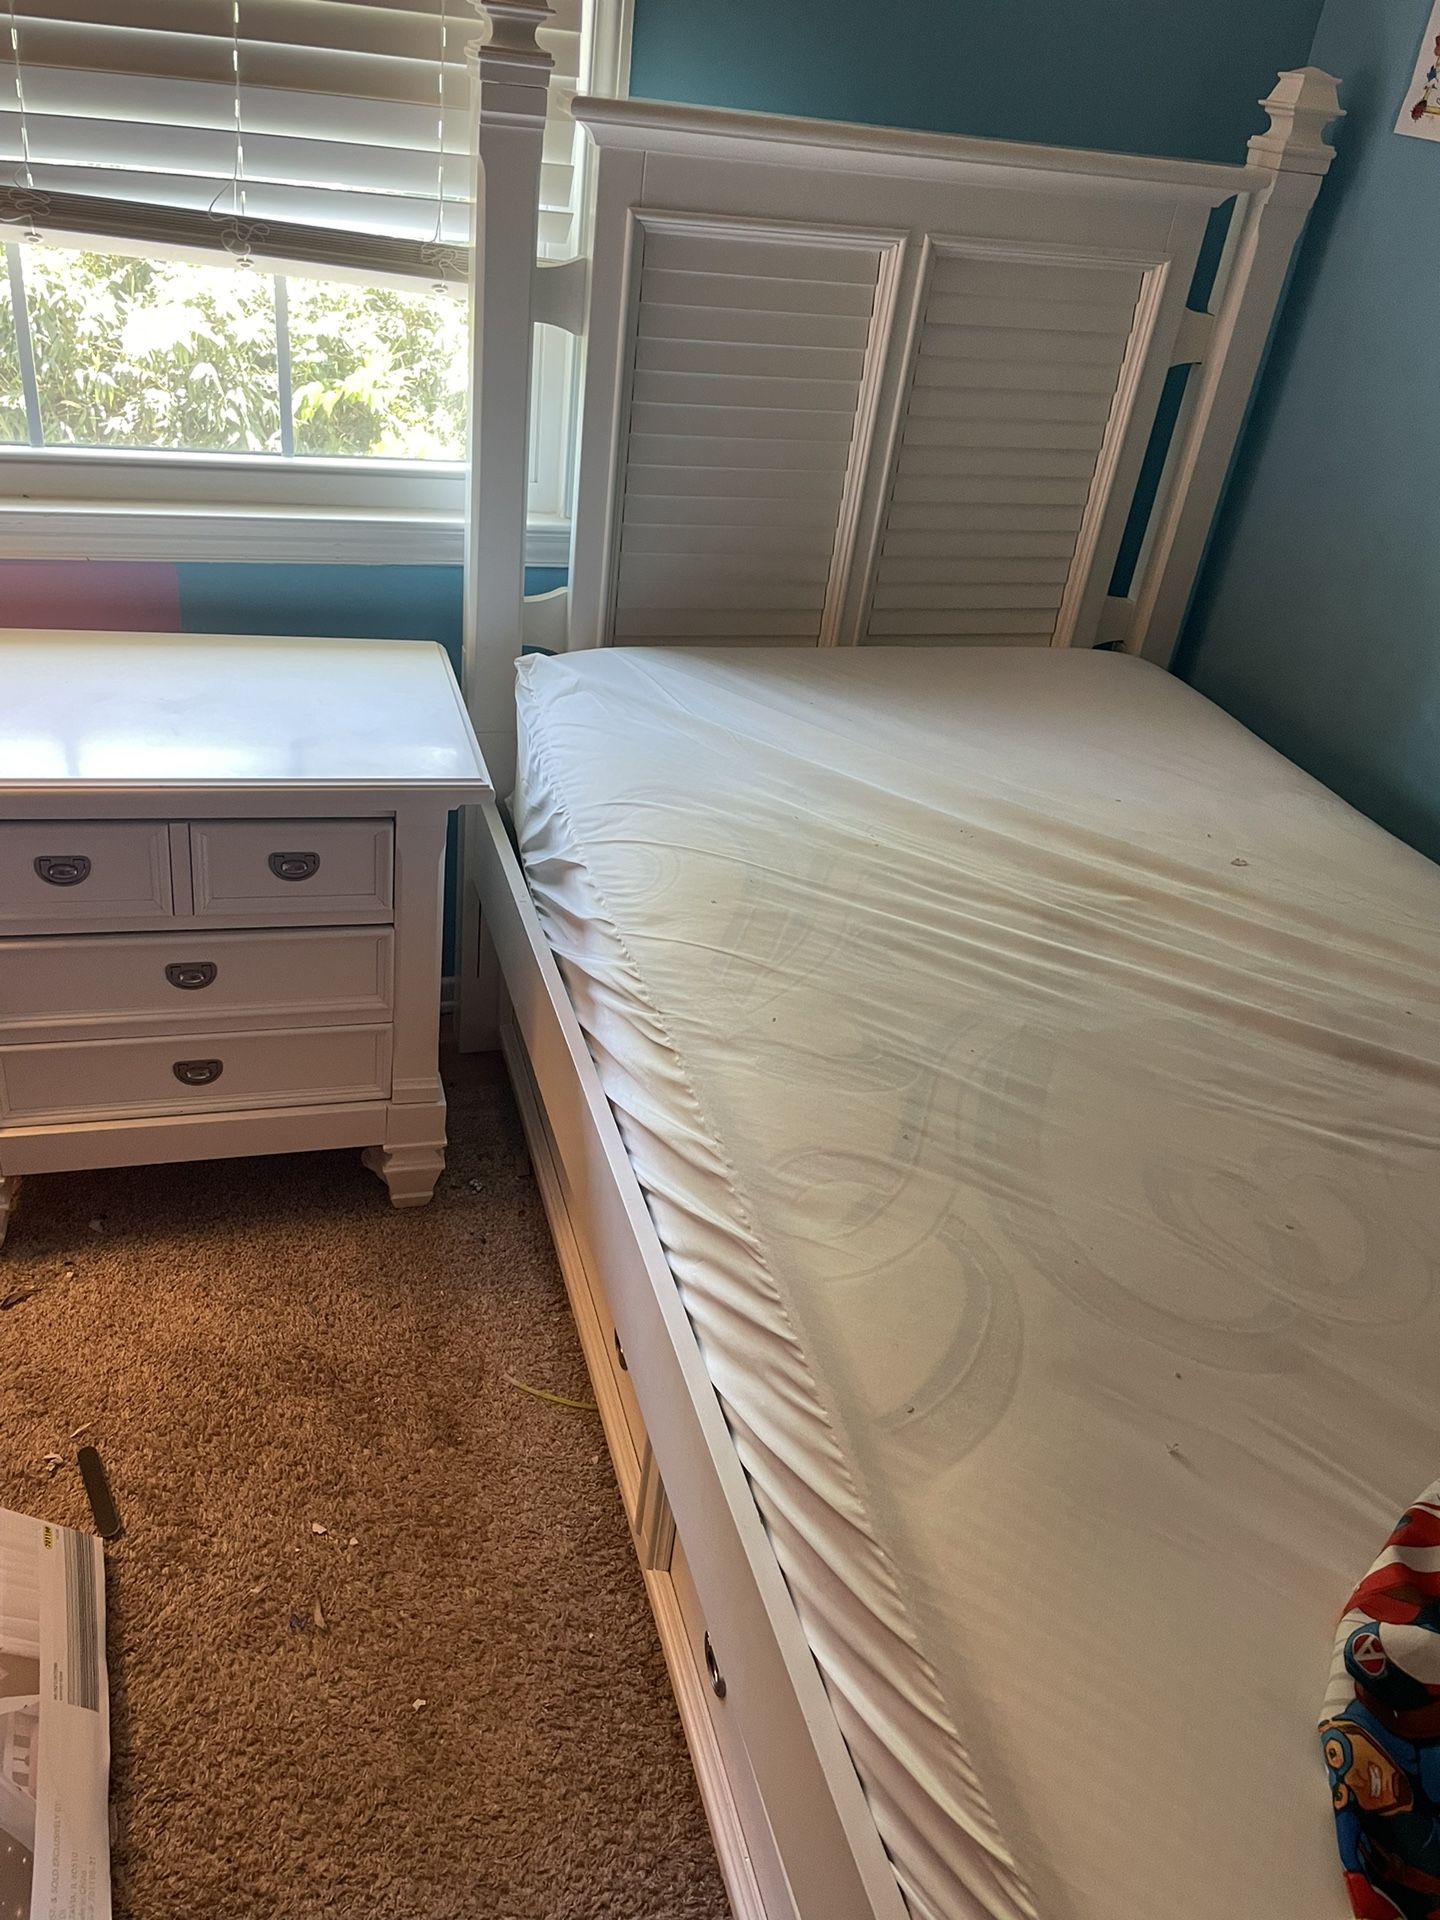 Twin Bed Set with trundle From Rooms To Go 